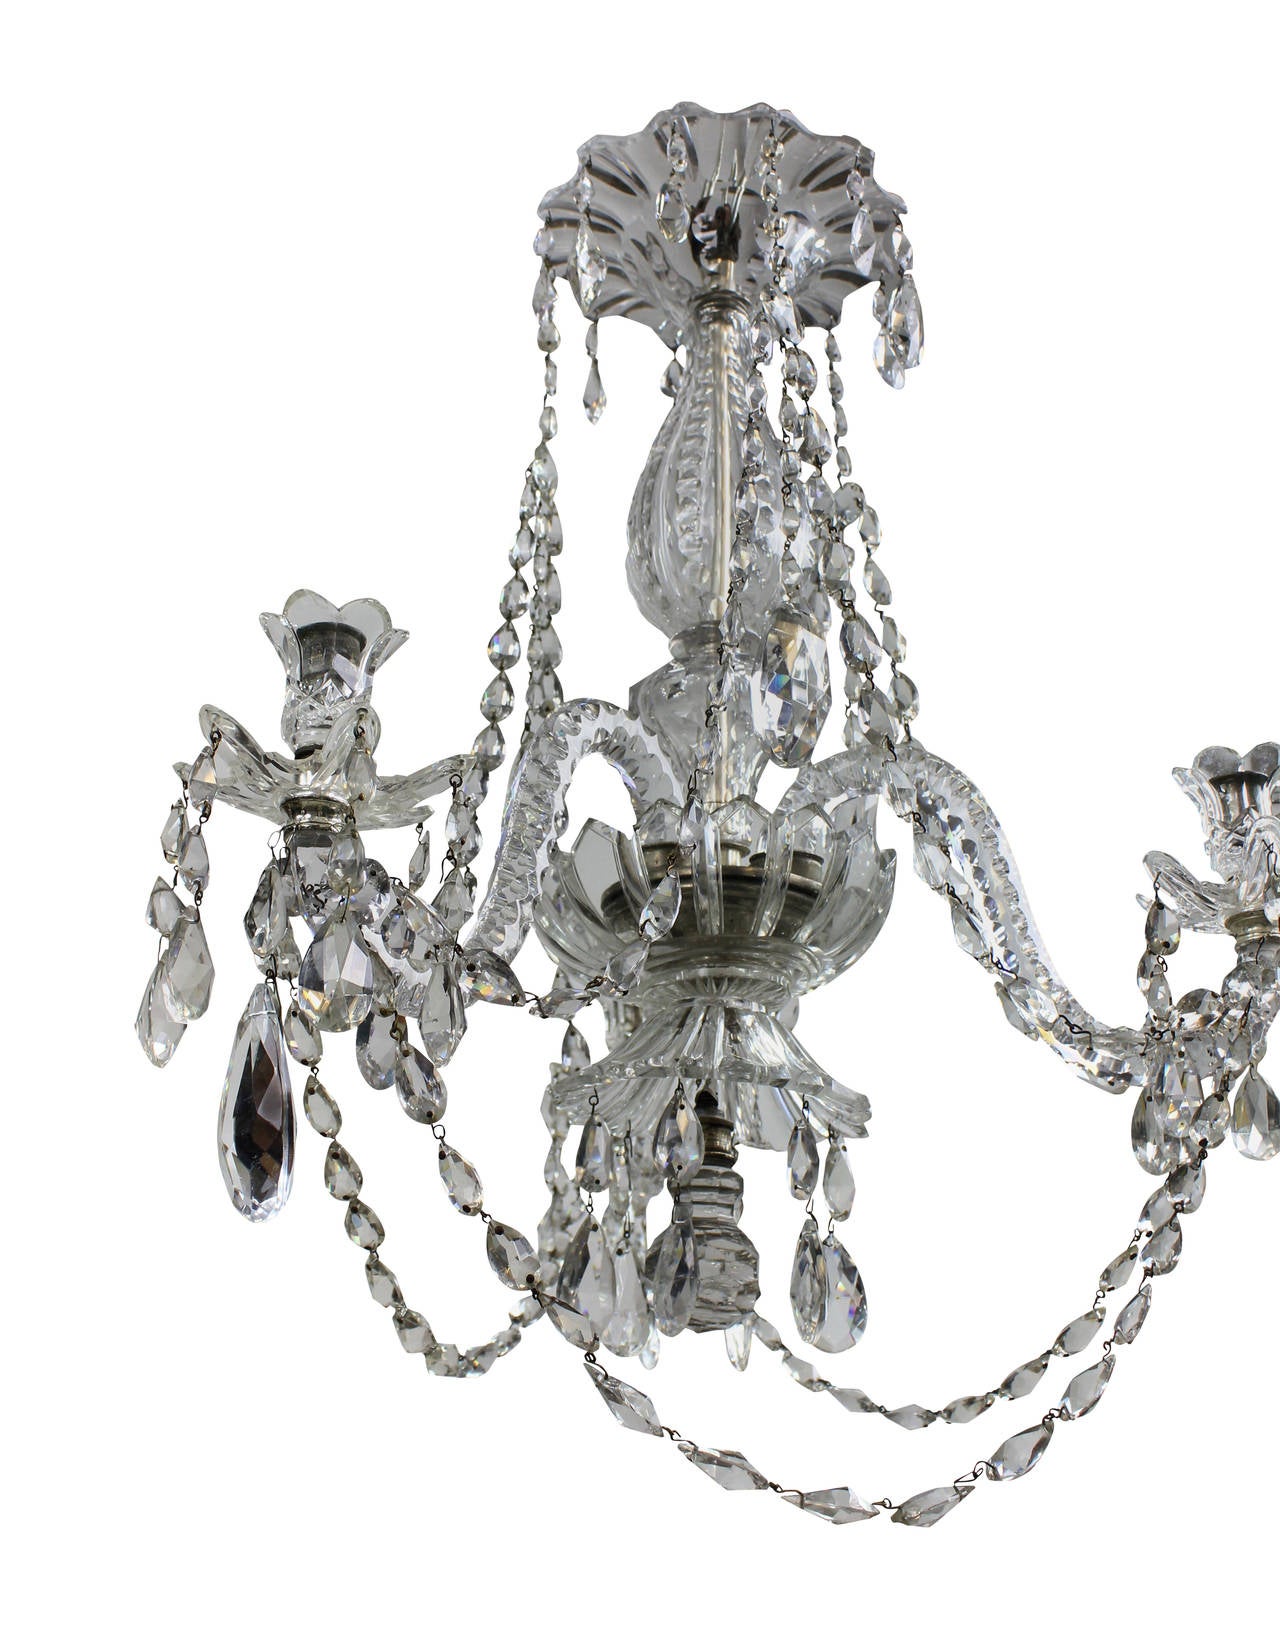 A French cut glass chandelier of smaller proportions by Baccarat of Paris. Suitable for lower ceilings, this chandelier is hung throughout with beautifully cut swags and pendants. This chandelier contains patented Baccarat Designs.